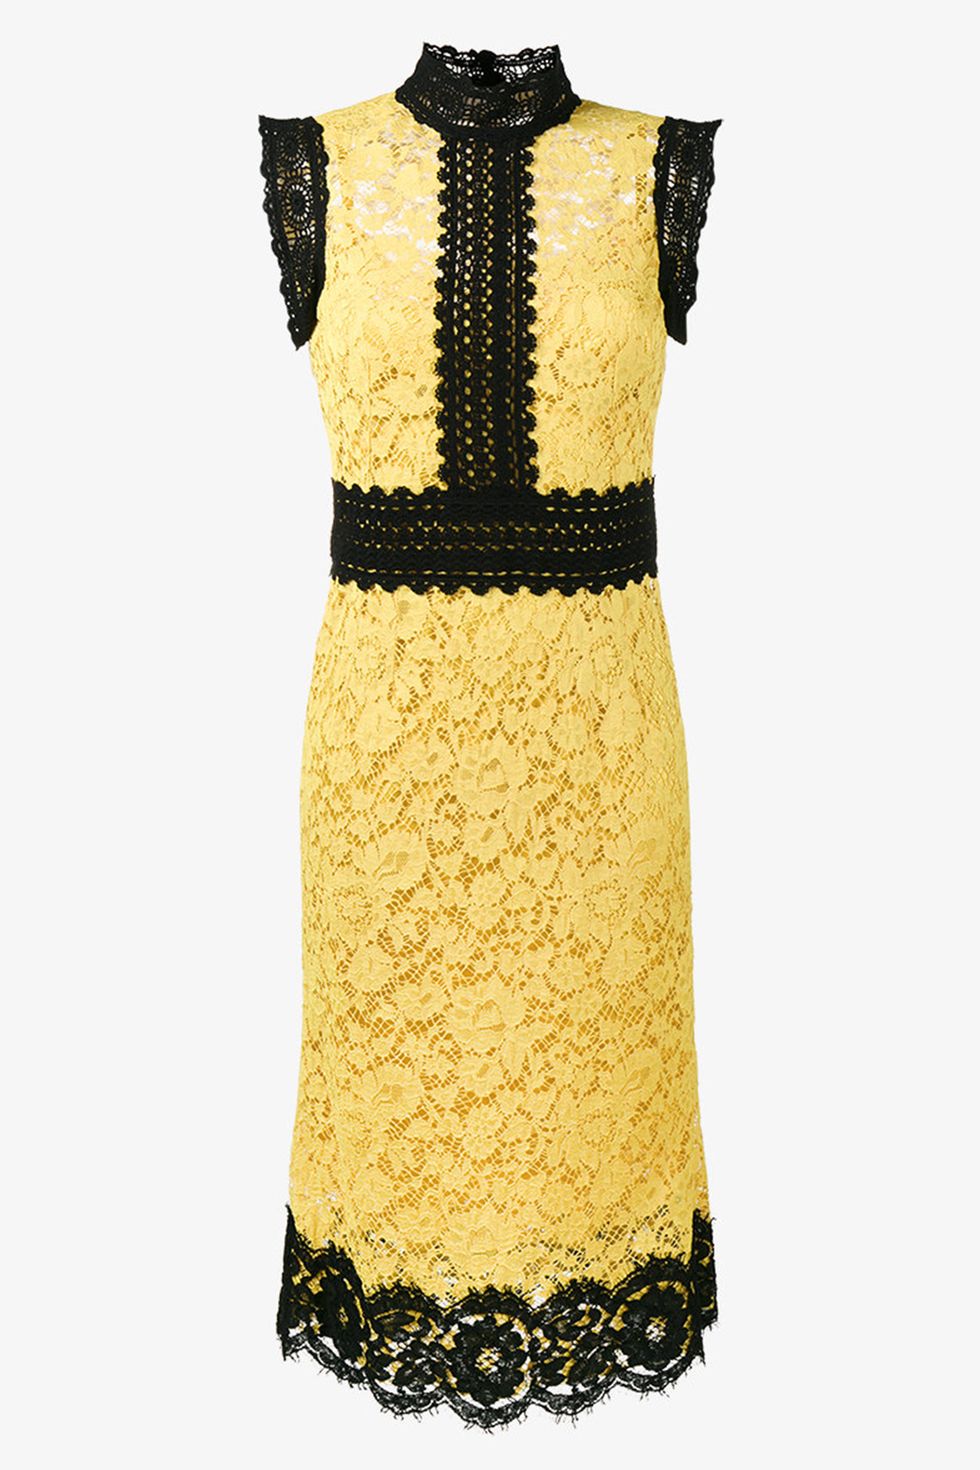 Dolce and Gabbana wedding guest dress look black and yellow lace 